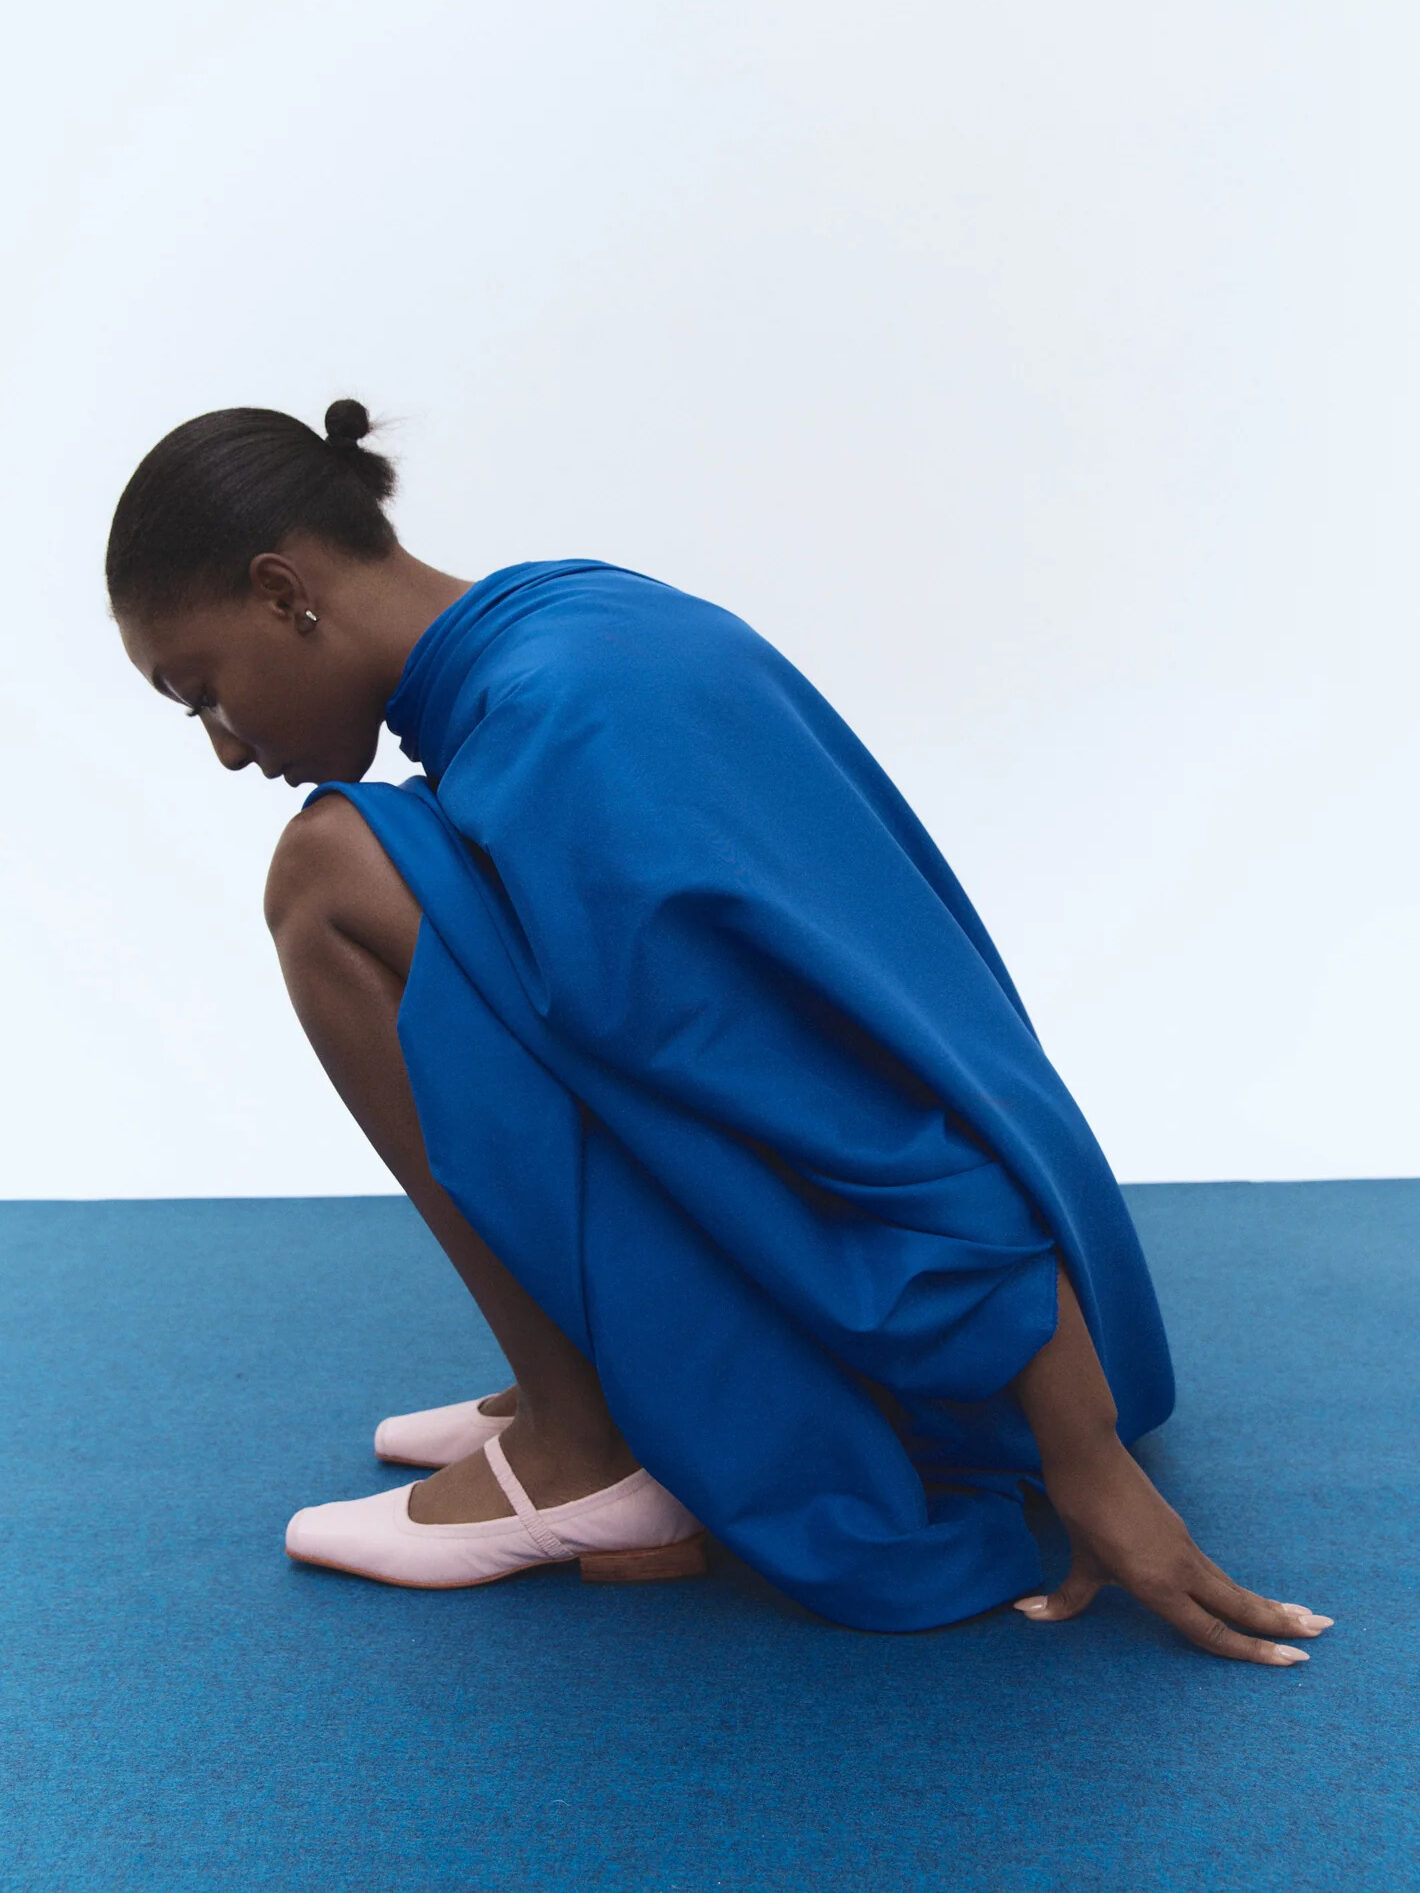 A woman in a flowing blue dress and pink shoes crouches on a blue mat against a white background.